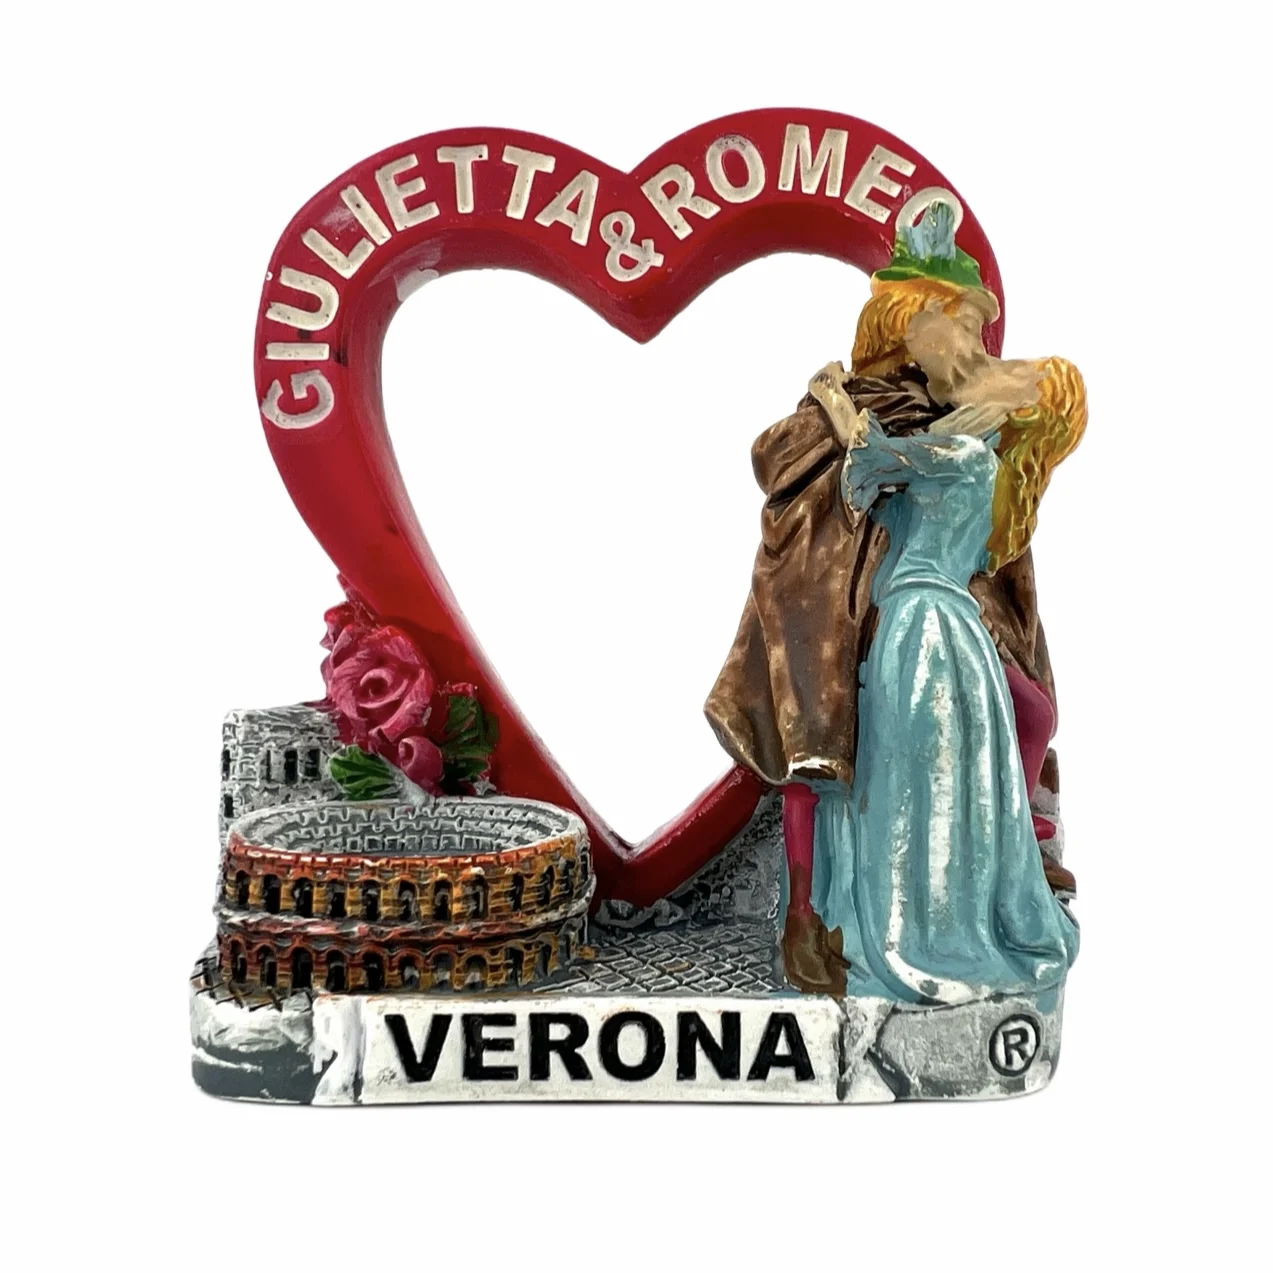 

Italy Fridge Magnets Verona Romeo and Juliet Travel Memorial Magnetic Refrigerator Stickers Gift Room Decoration Collectio